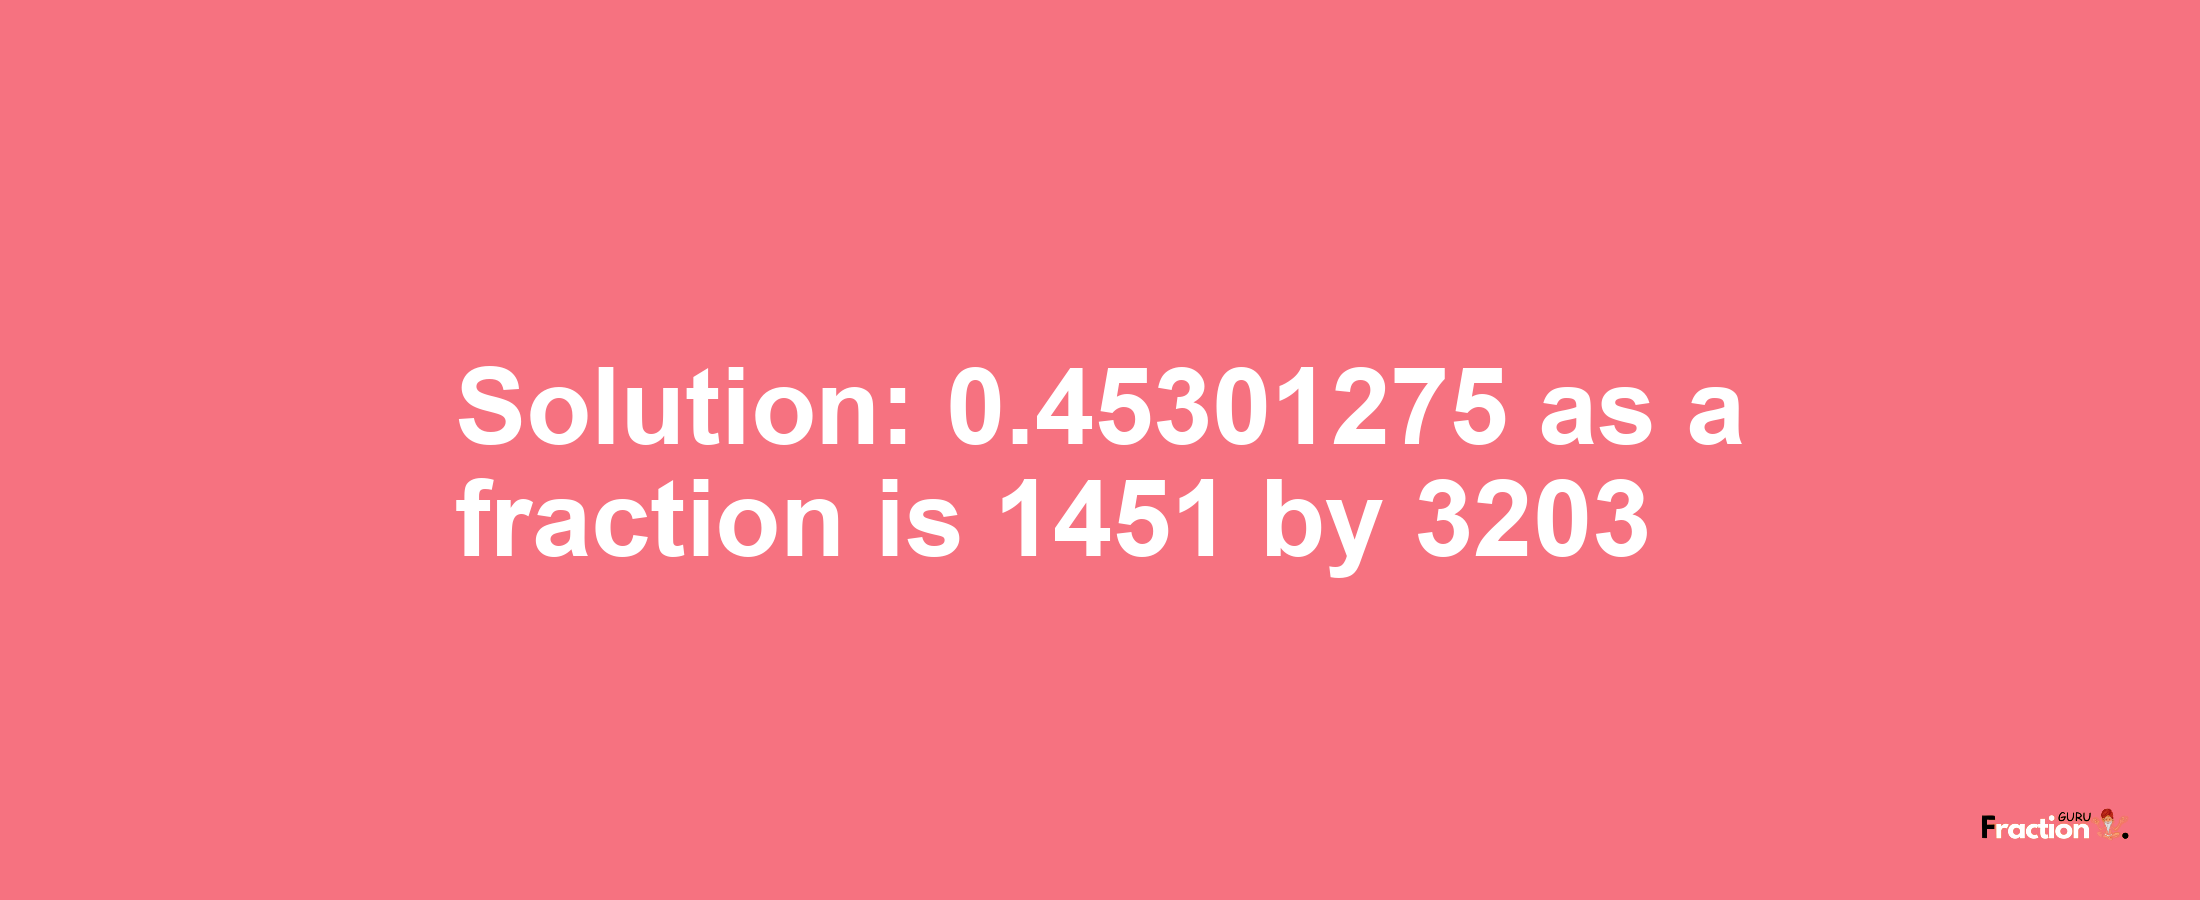 Solution:0.45301275 as a fraction is 1451/3203